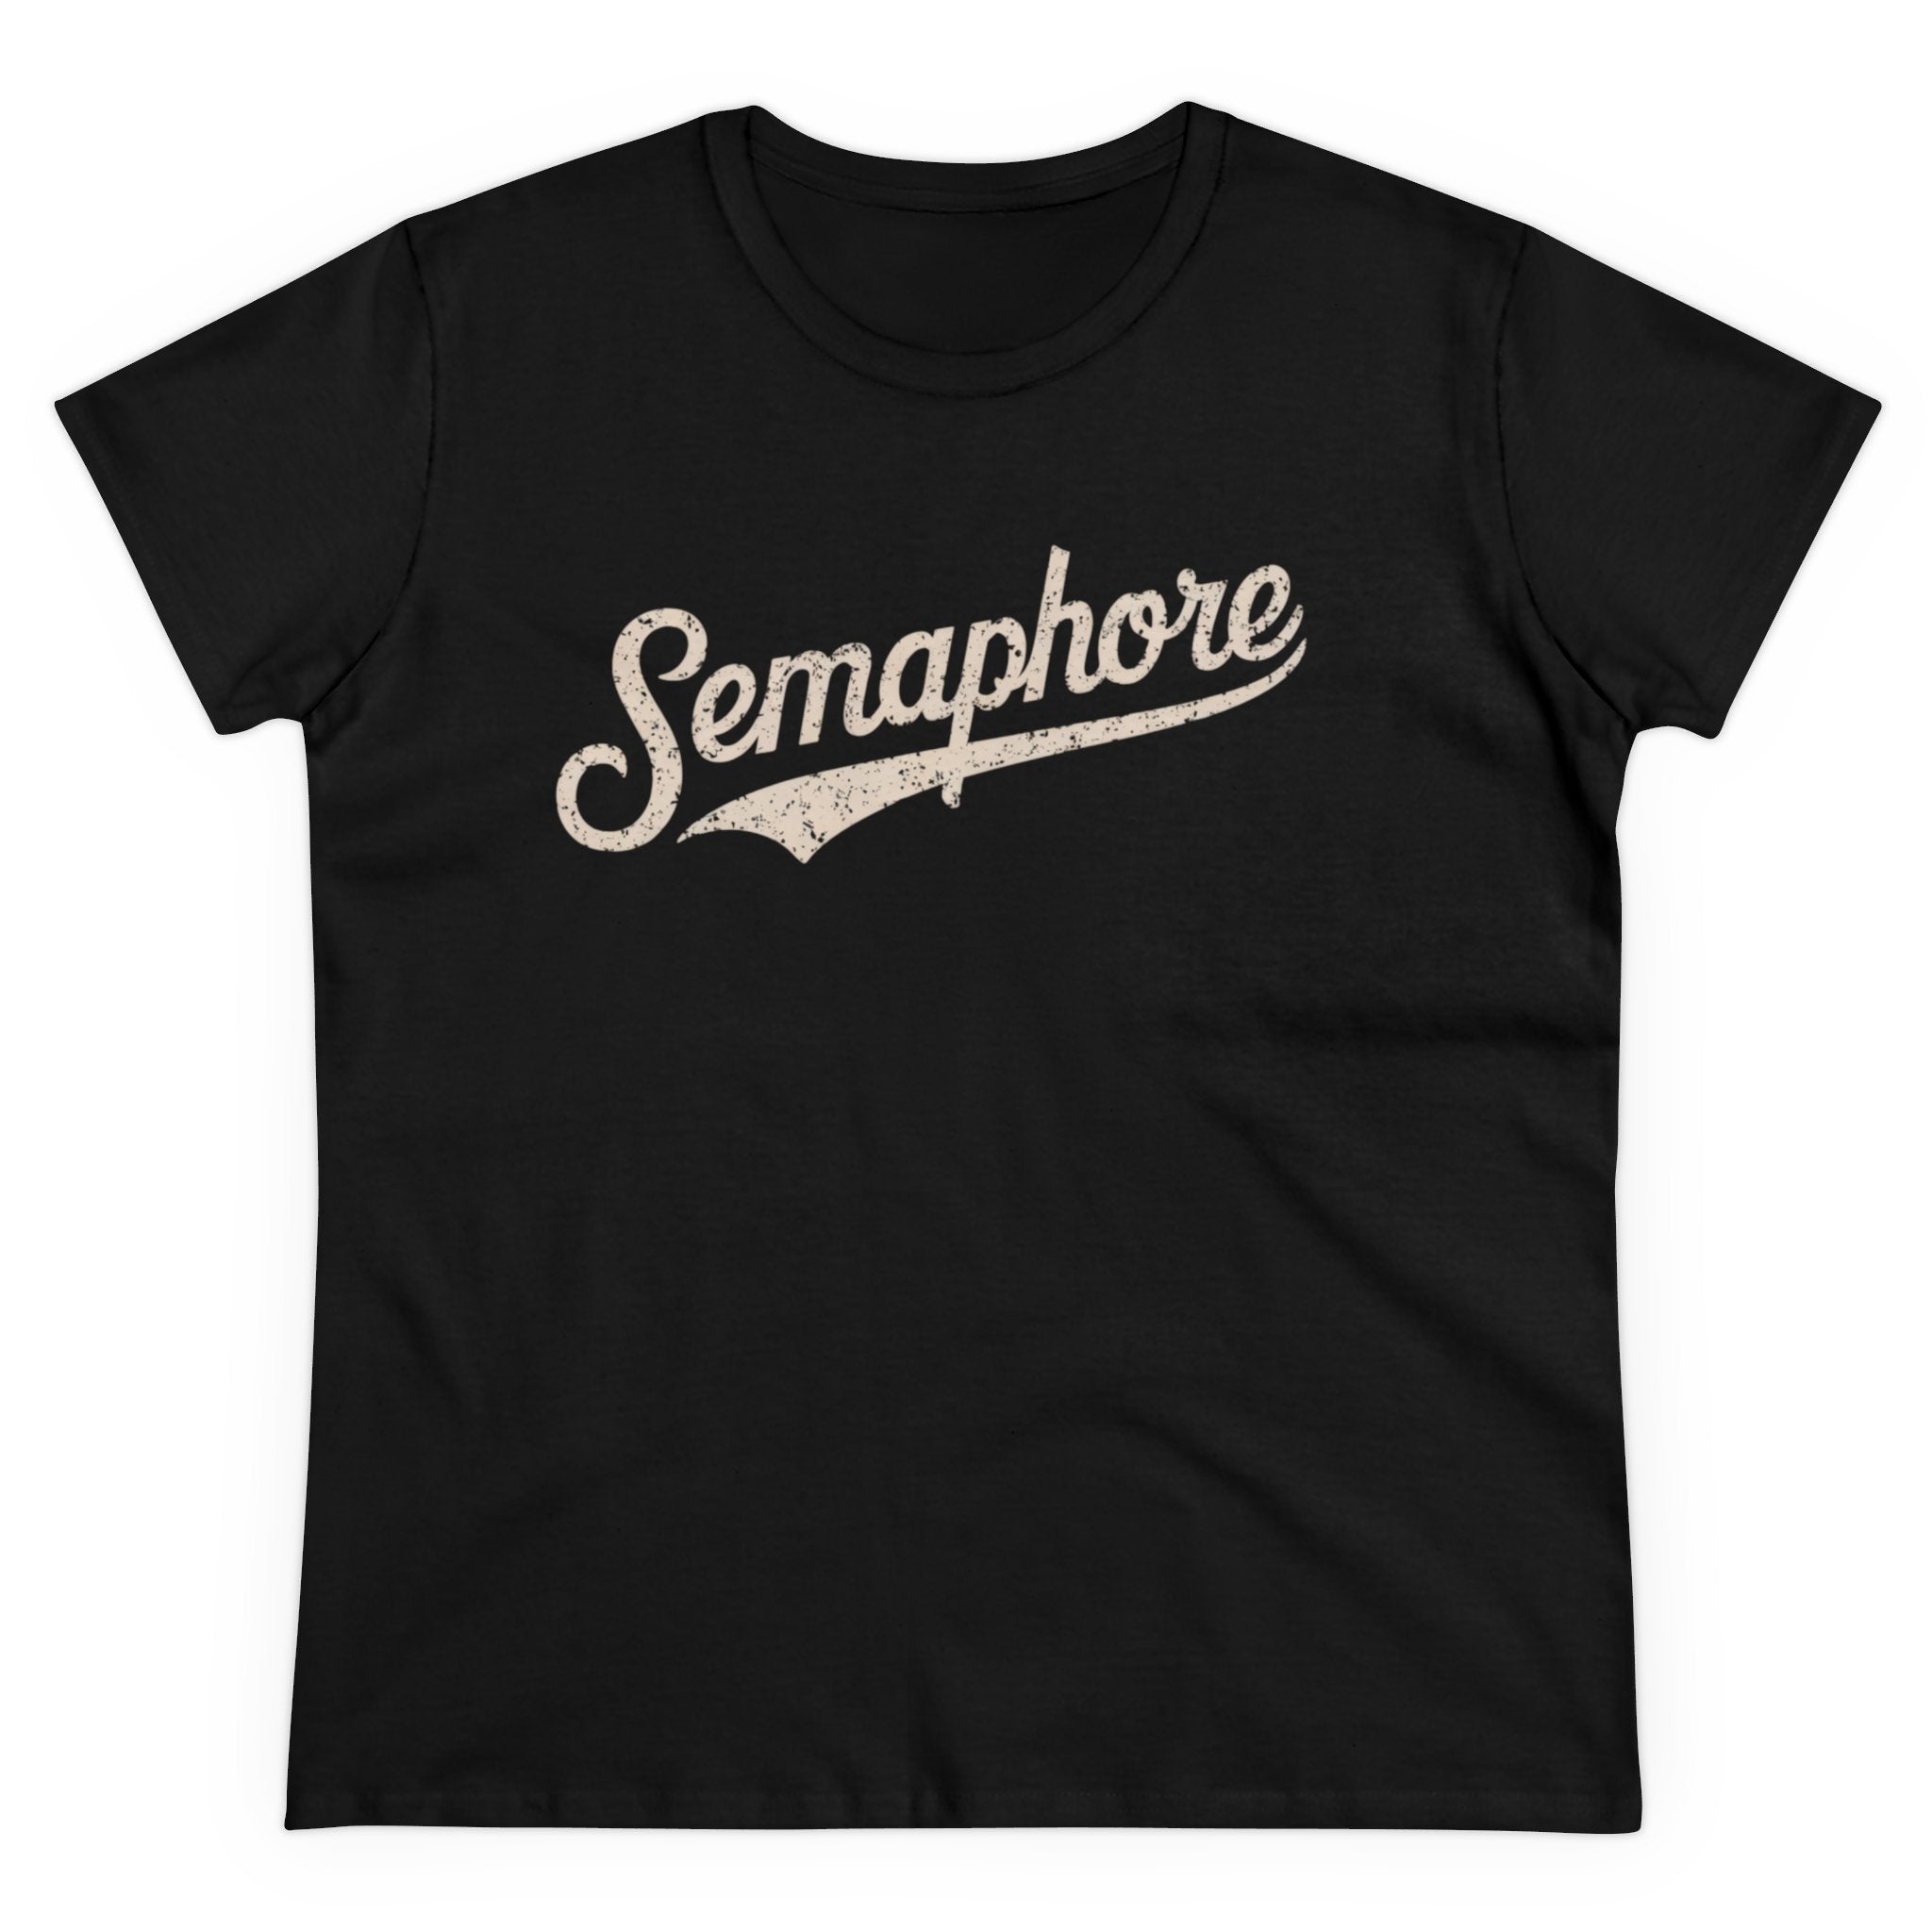 The Semaphore - Women's Tee is a black t-shirt featuring the word "Semaphore" written in a vintage script font across the chest, with a contoured fit that offers both comfort and style.